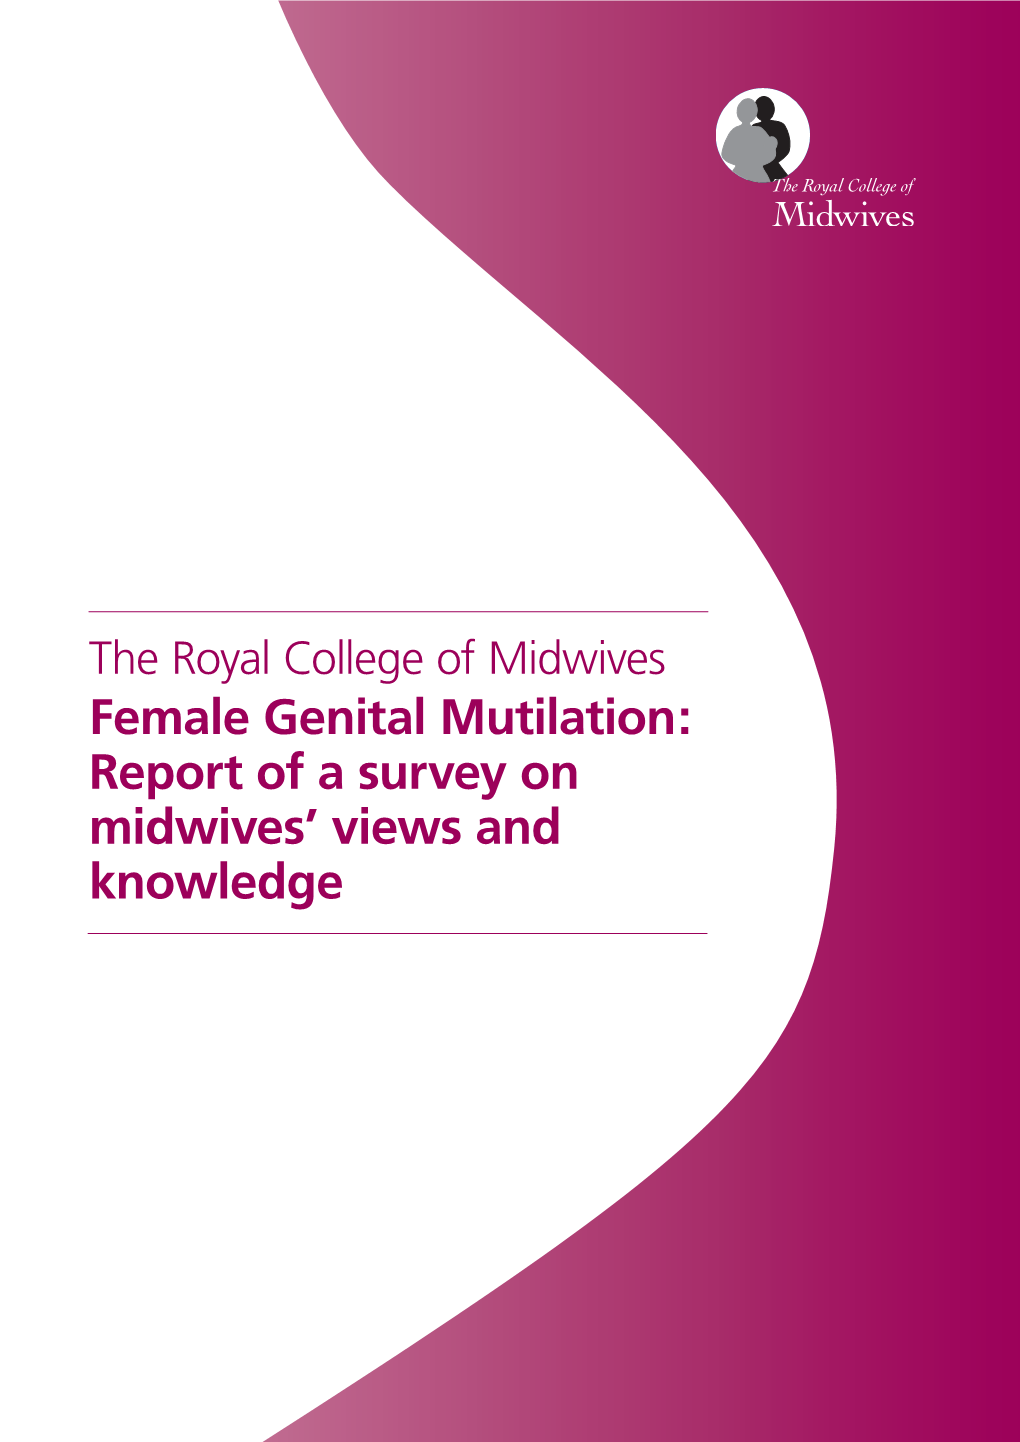 Female Genital Mutilation: Report of a Survey on Midwives’ Views and Knowledge